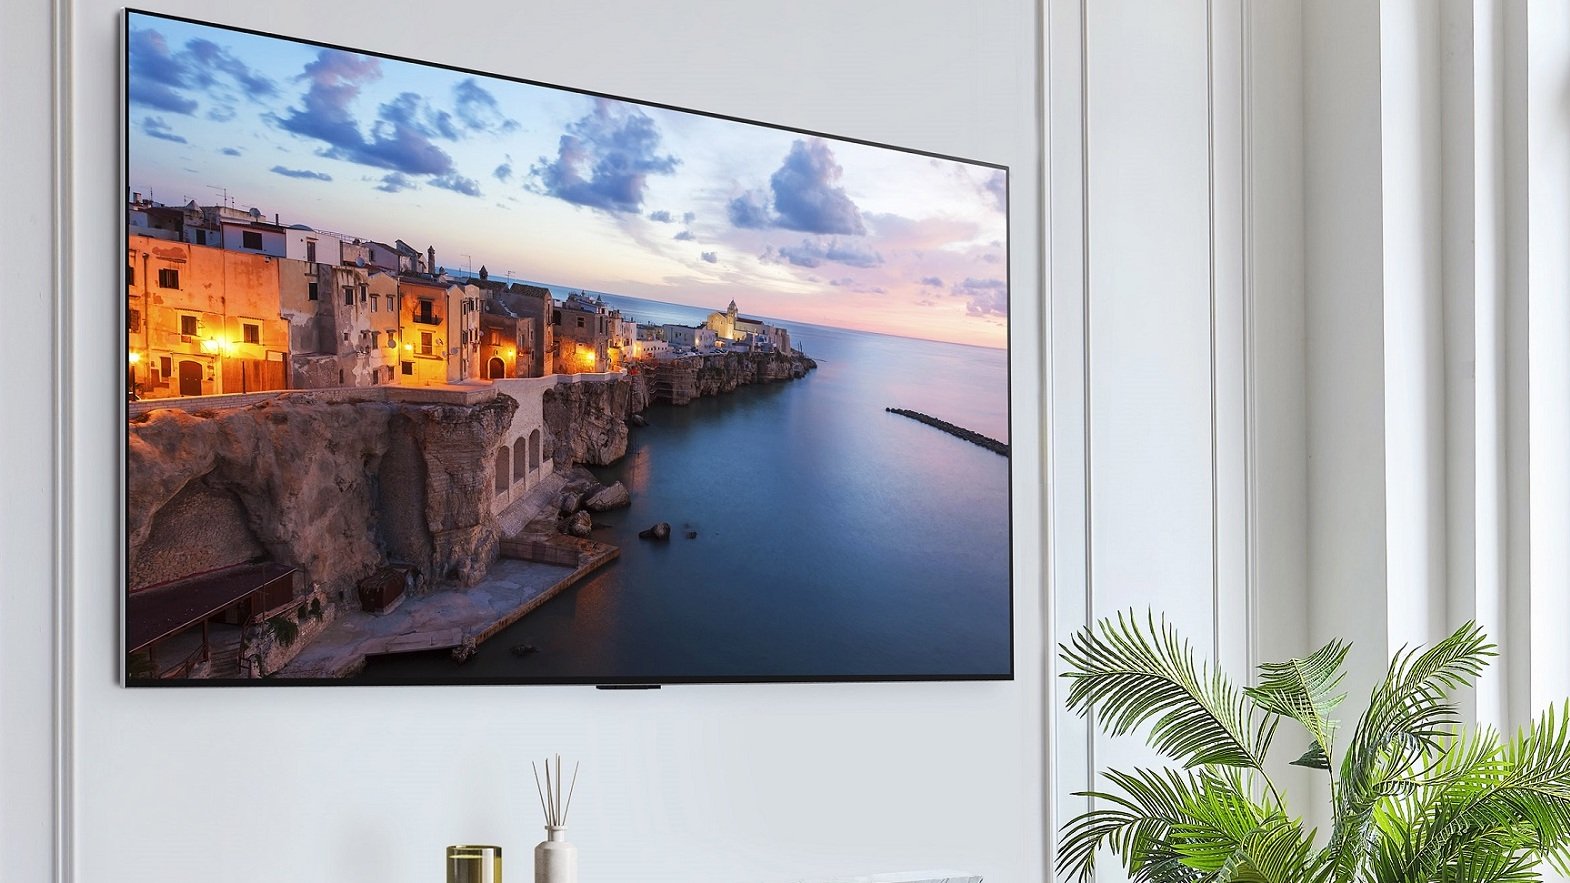 A panel LG G3 OLED TV hanging on the wall in a living room